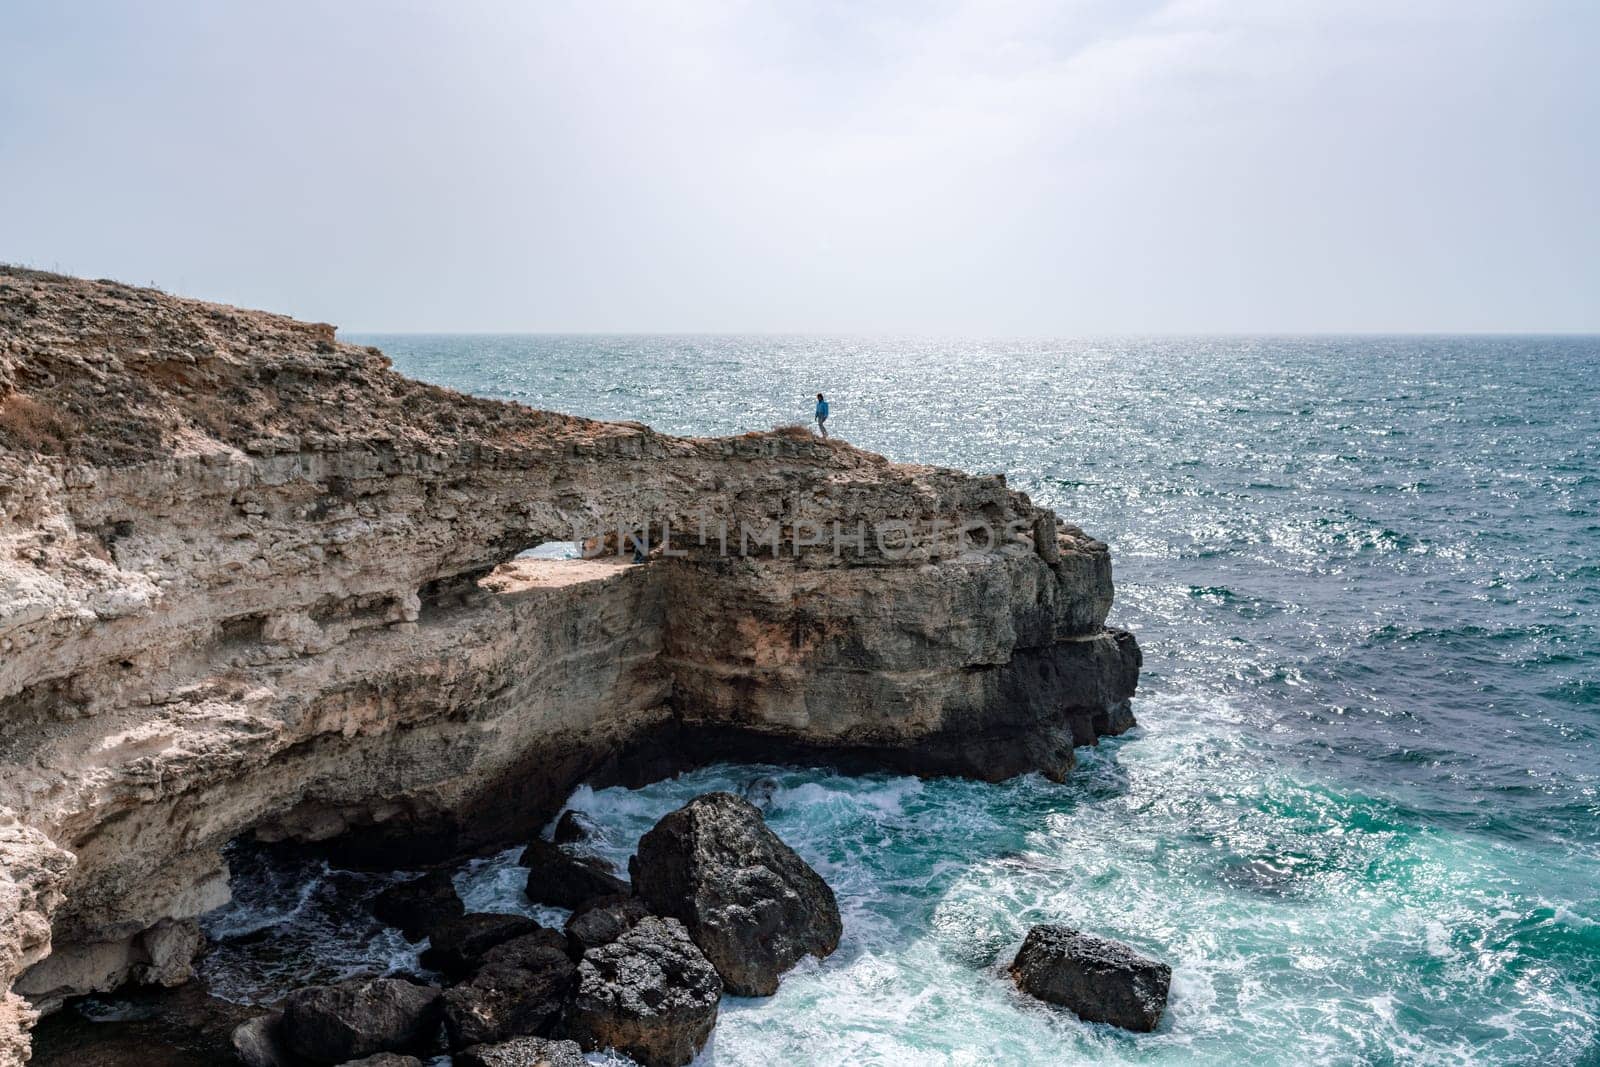 A rocky cliff overlooks the ocean, with the water crashing against the rocks. The scene is serene and peaceful, with the sound of the waves providing a calming atmosphere